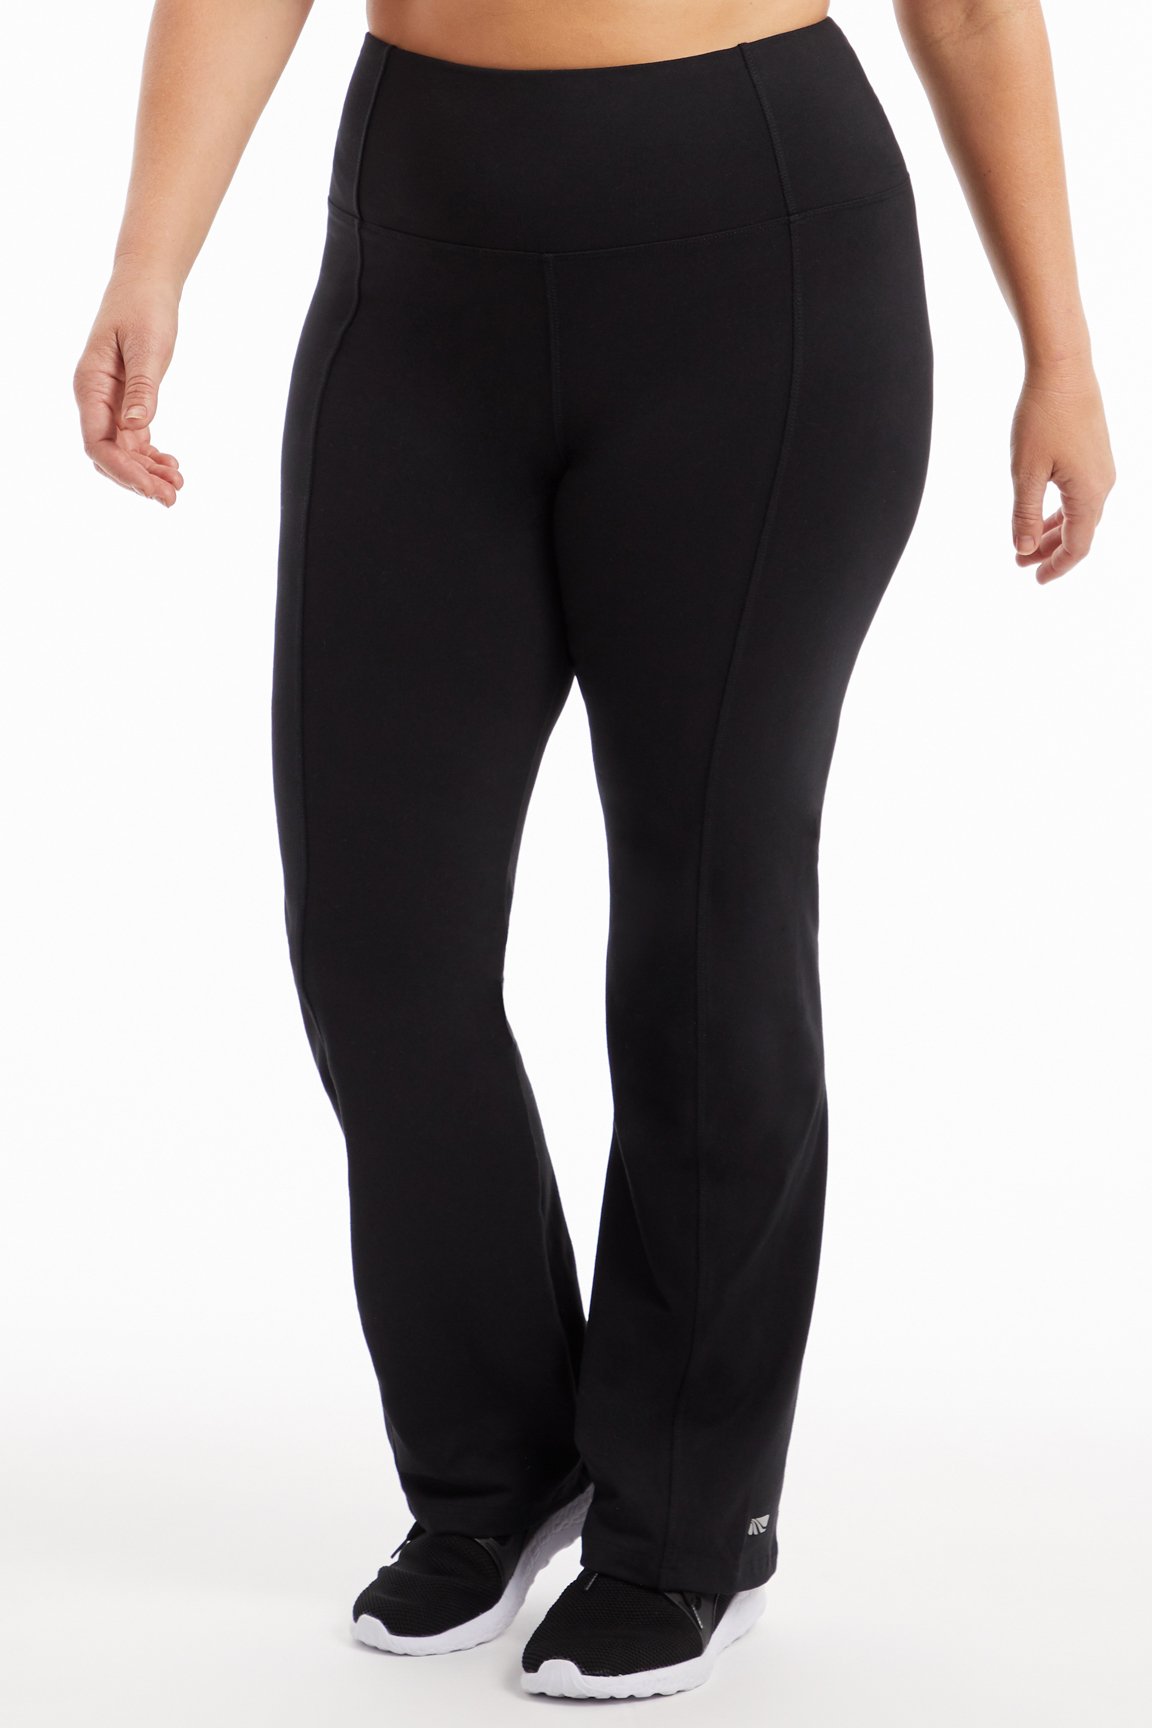 Zylioo Workout Pants Tall Size with Pockets,Mid Waist Yoga Pants